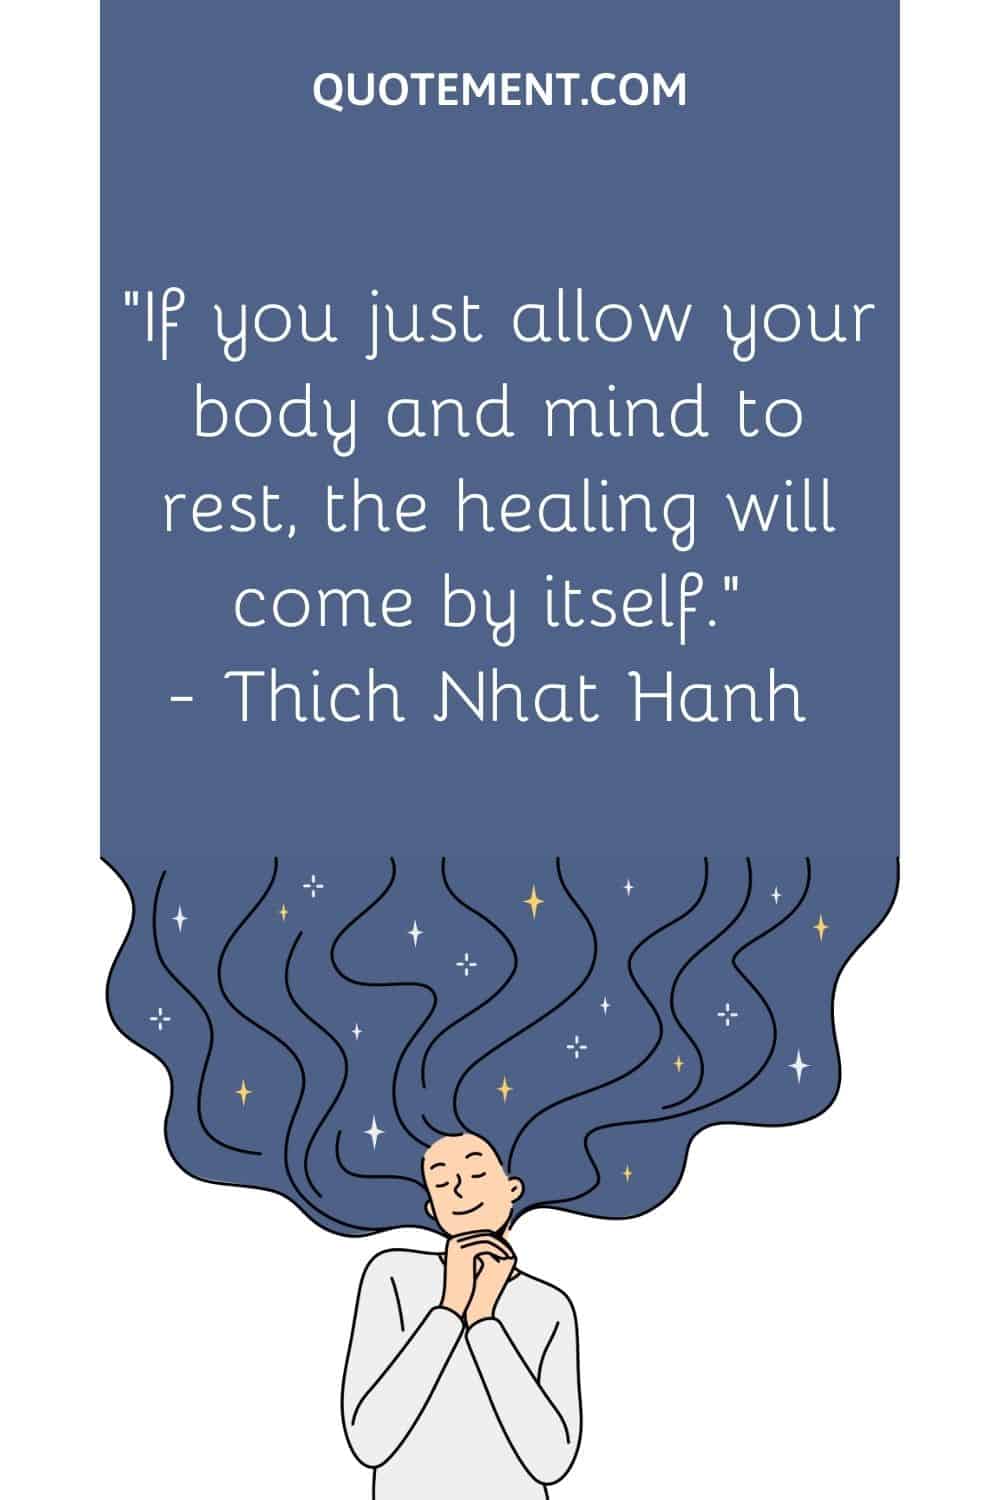 If you just allow your body and mind to rest, the healing will come by itself